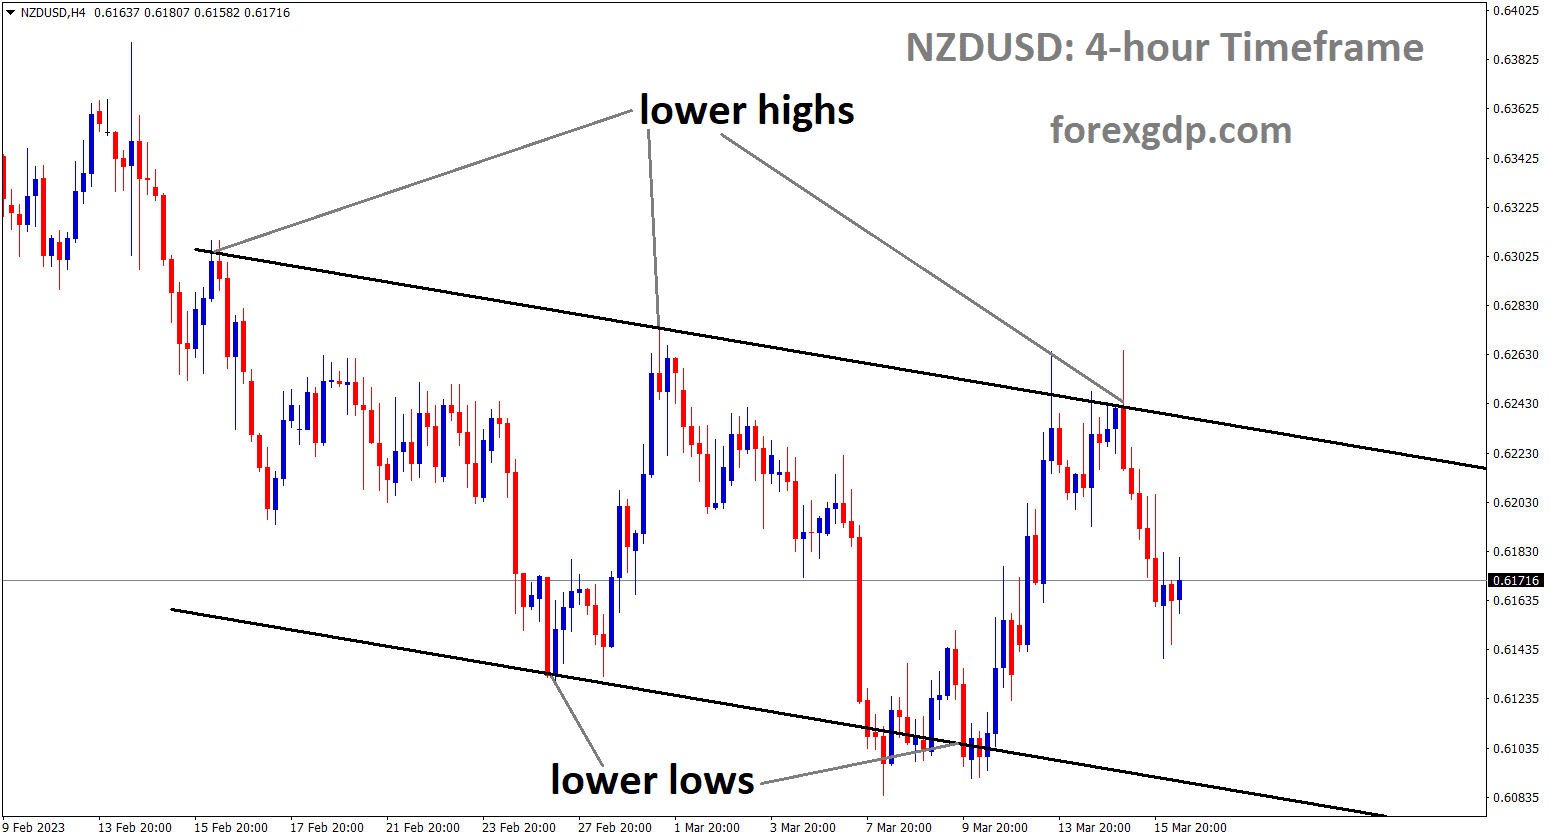 NZDUSD is moving in Descending channel and the market has fallen from the lower high area of the channel.